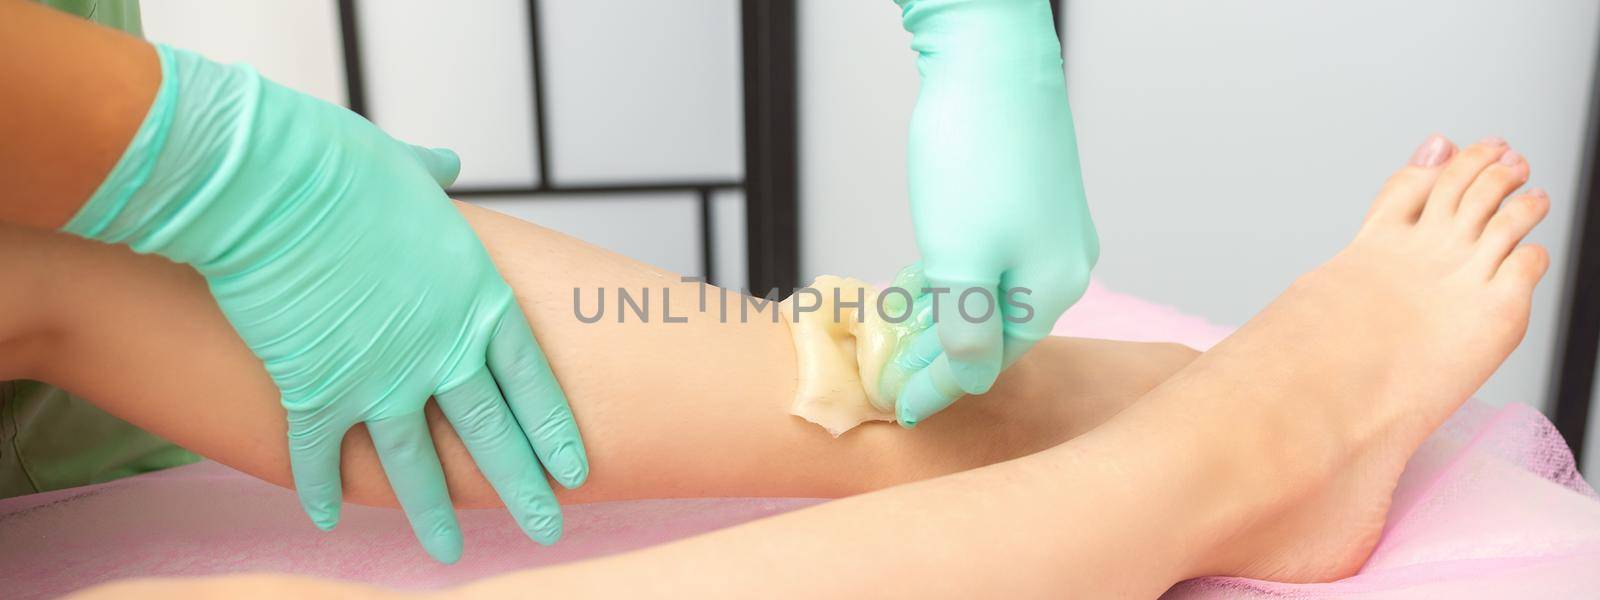 Waxing depilation procedure for removing hair on legs with sugaring paste in the beauty salon. by okskukuruza